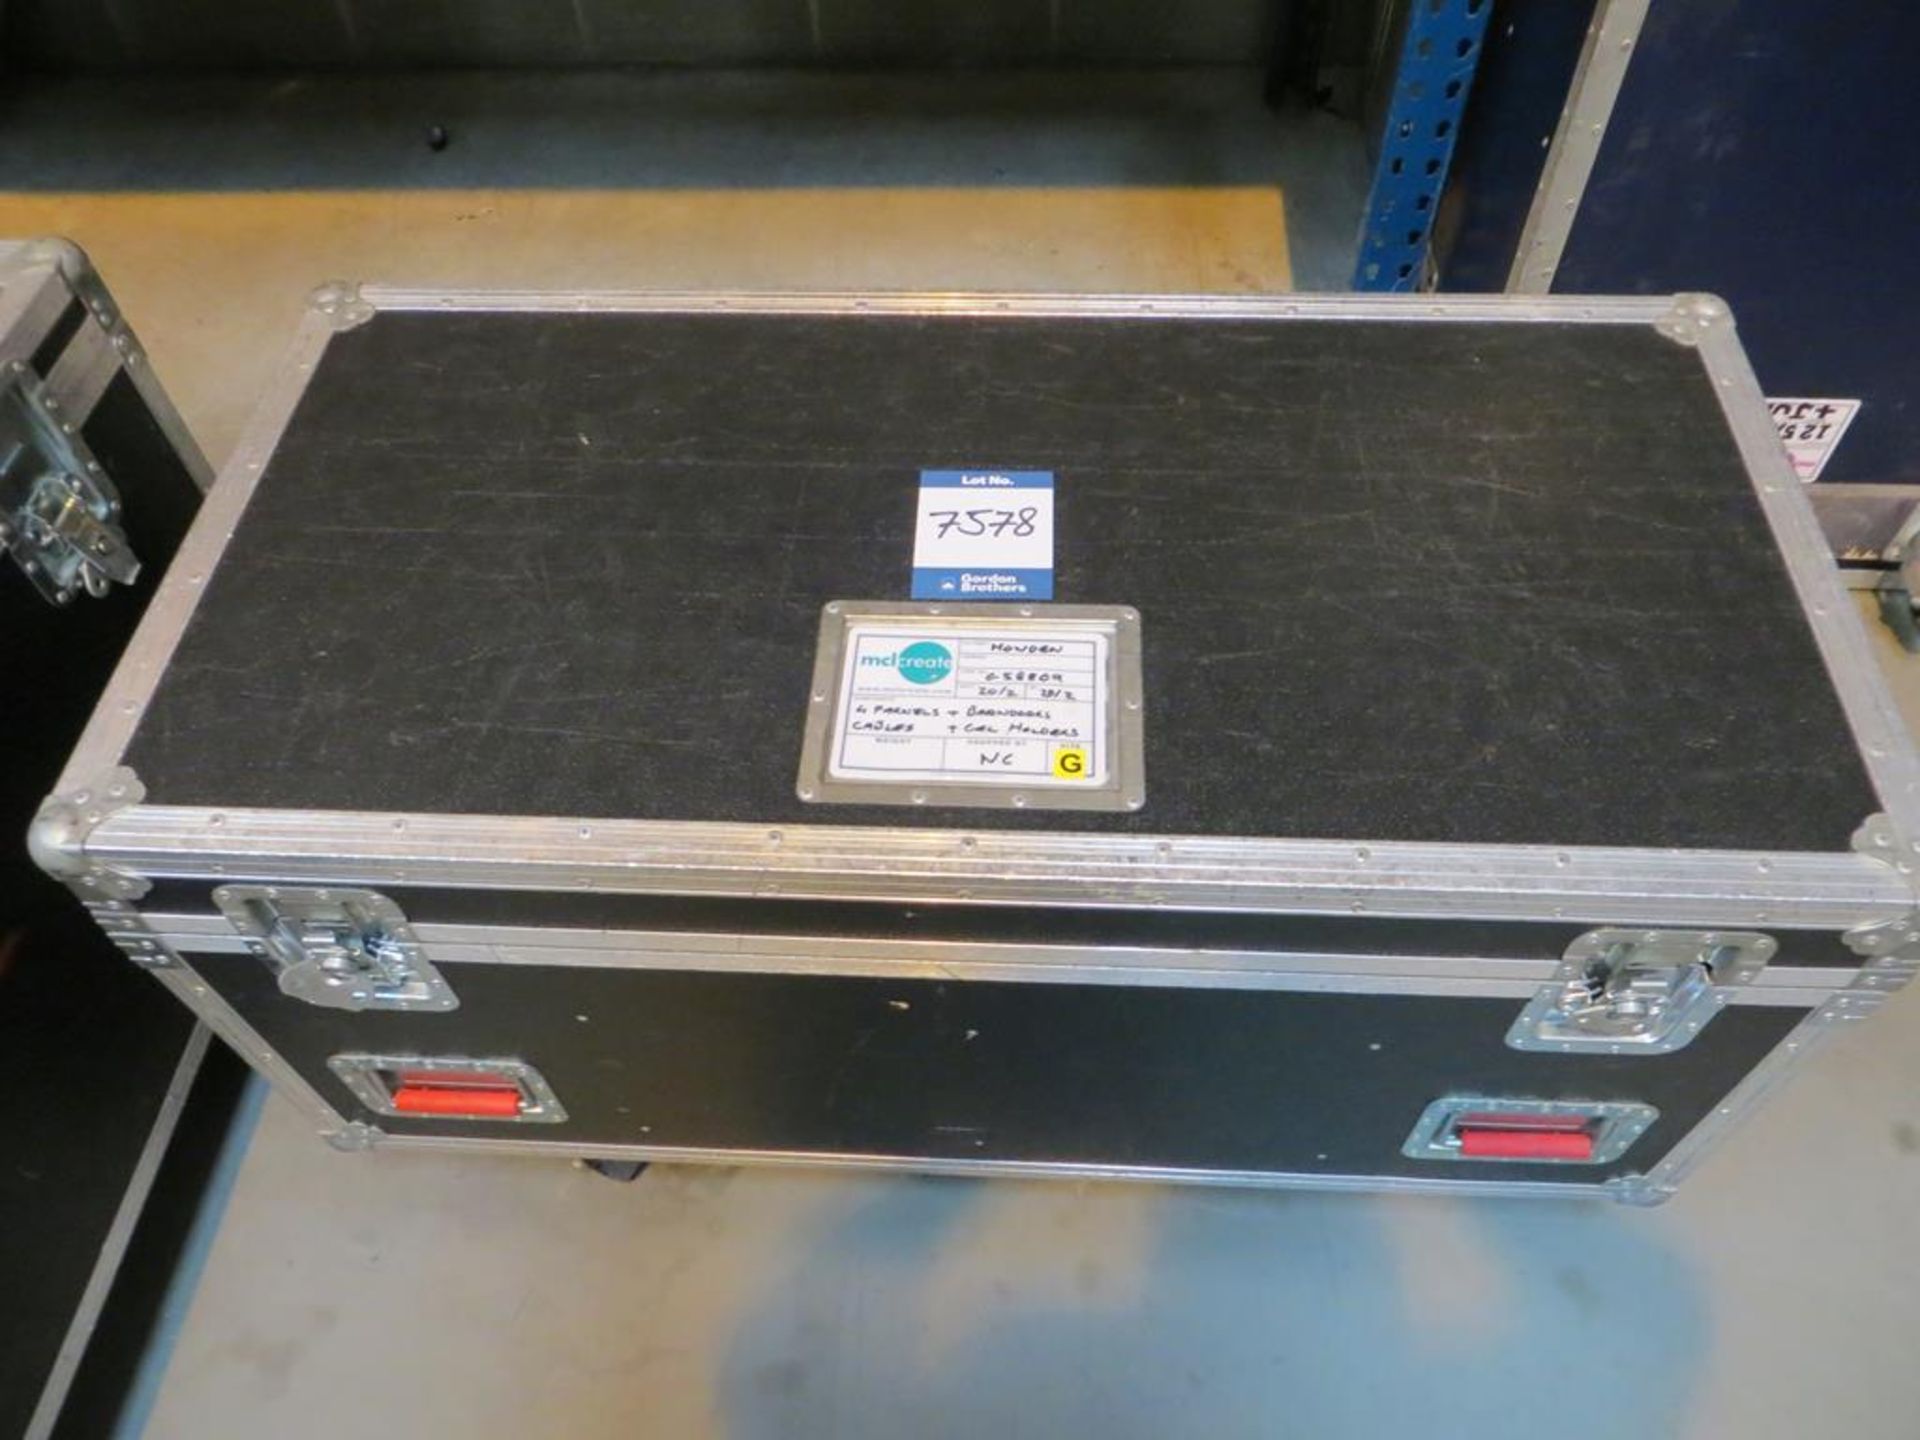 6x No. ETC, Source 4 Parnel spotlamps with hangers in transit case: Unit C Moorside, 40 Dava Street, - Image 3 of 4